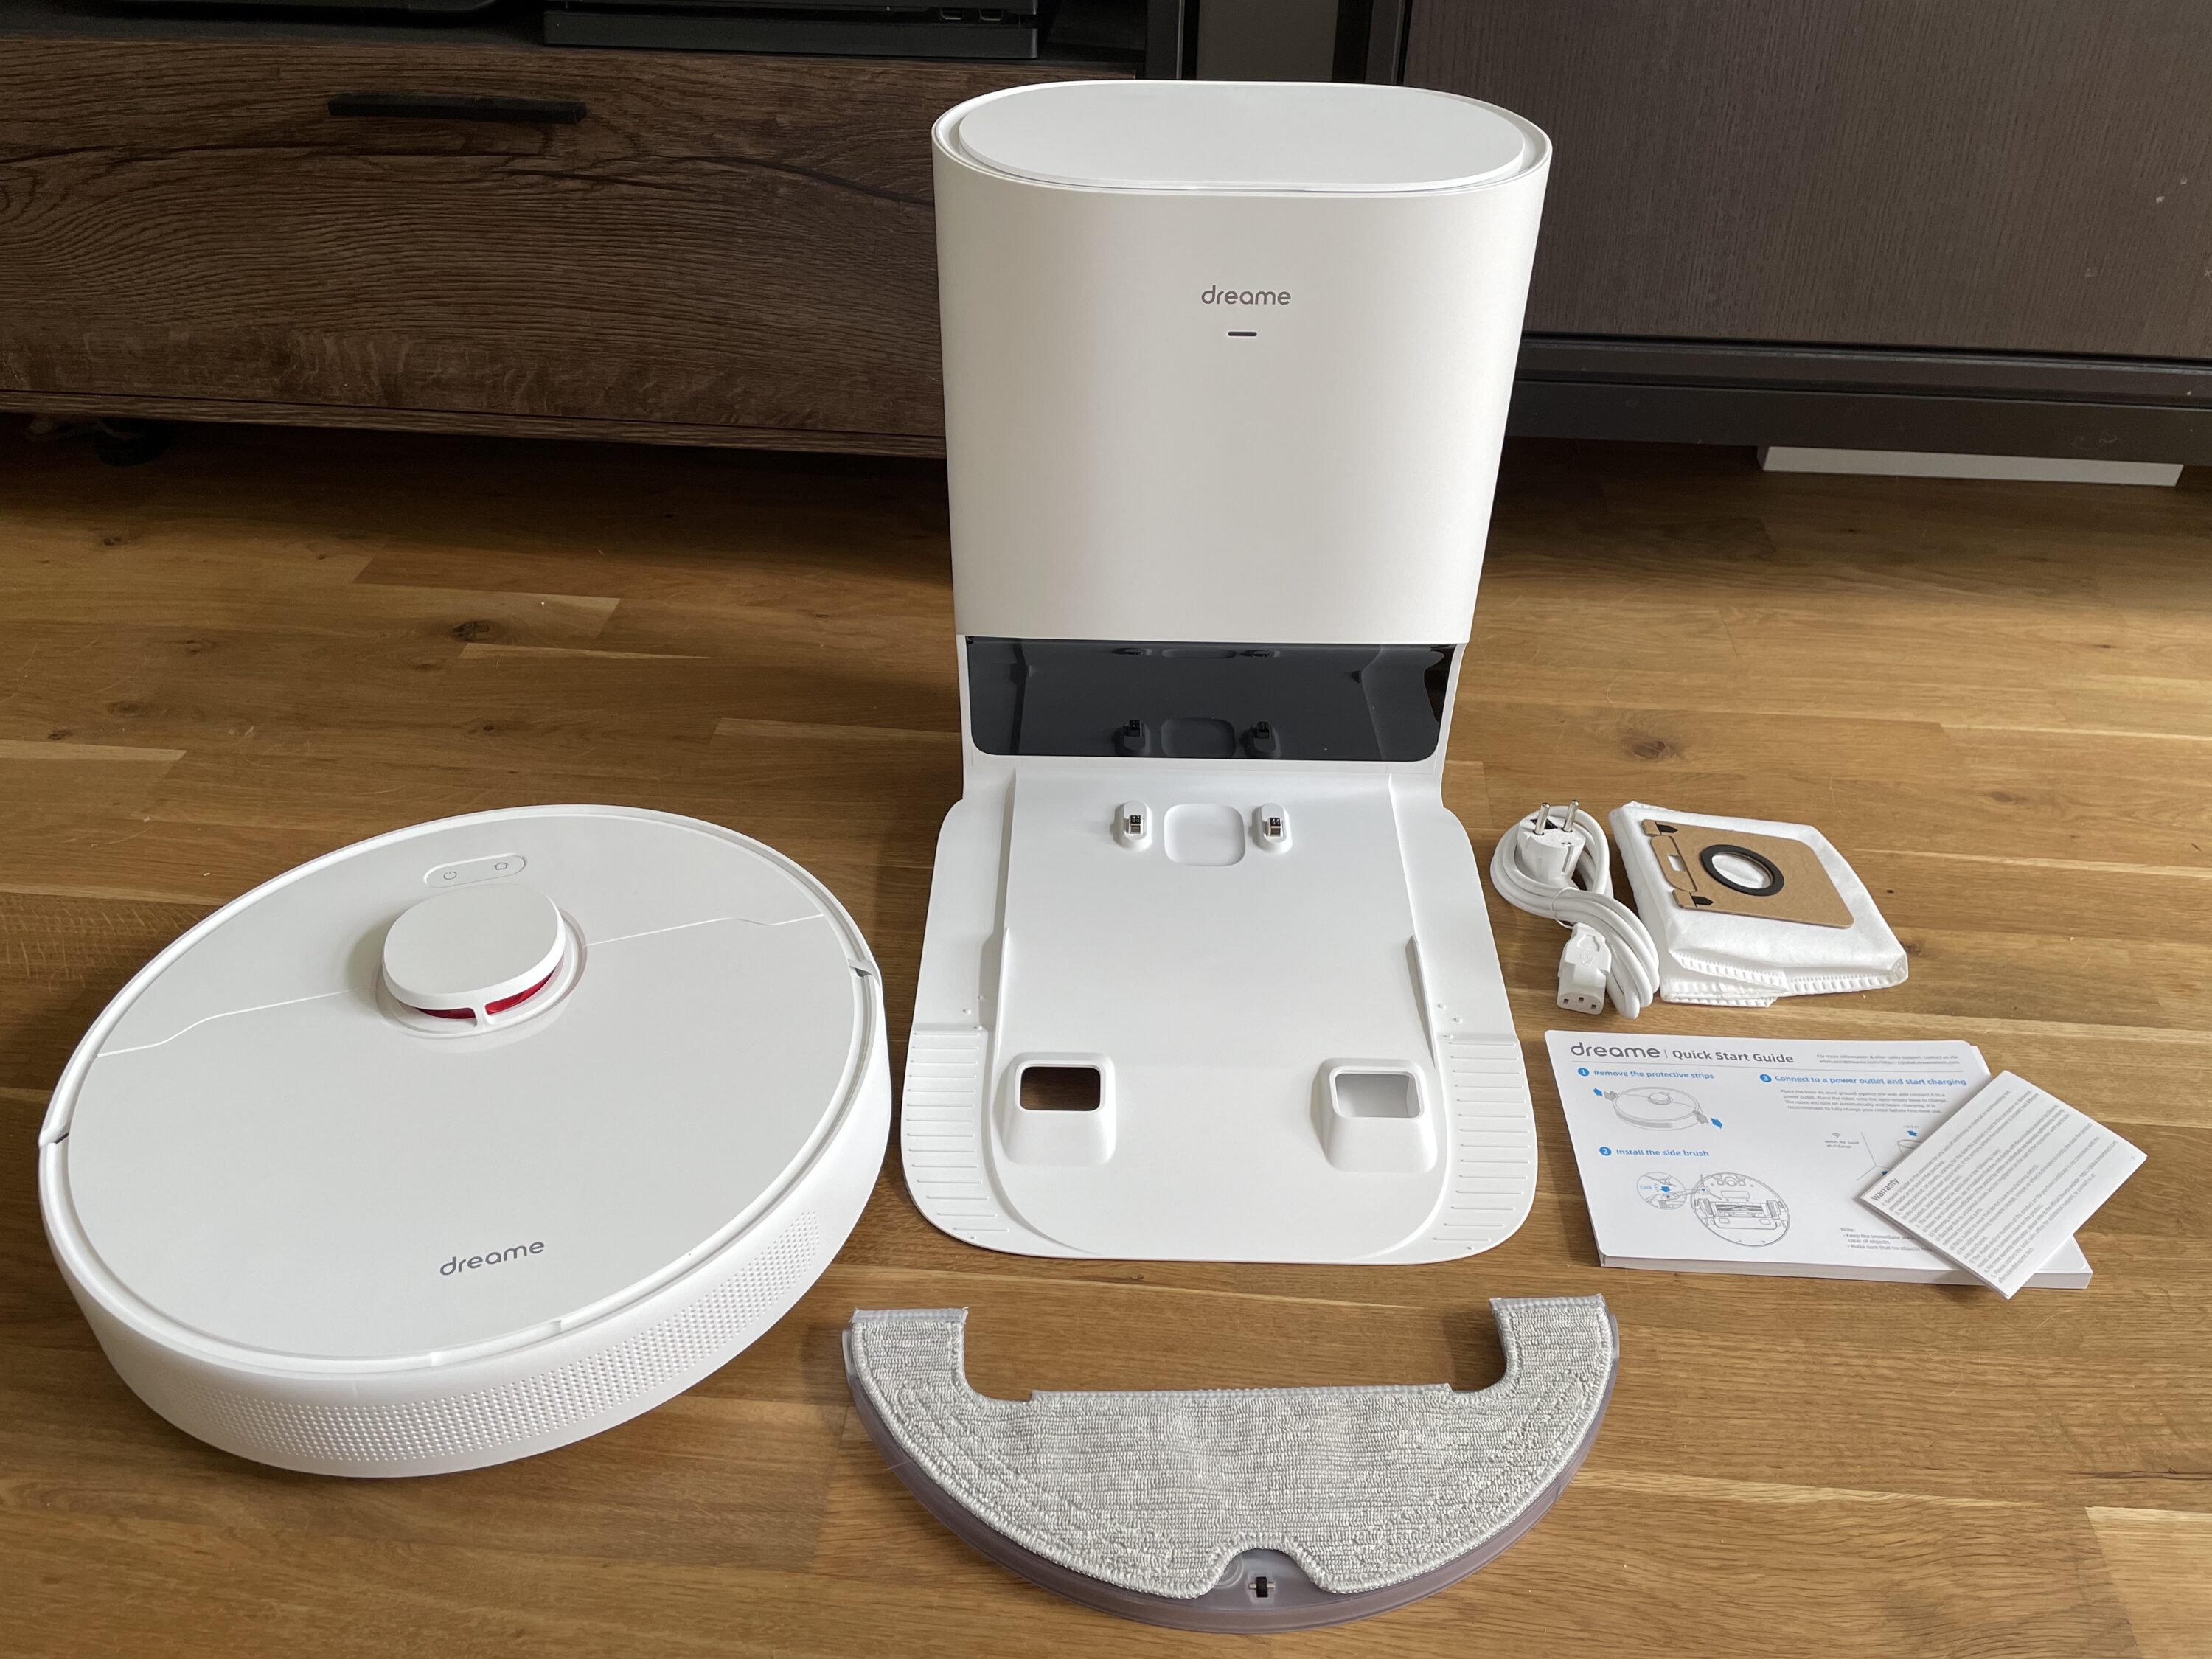 Dreame D10 Plus in test: Powerful robot vacuum cleaner at a fair